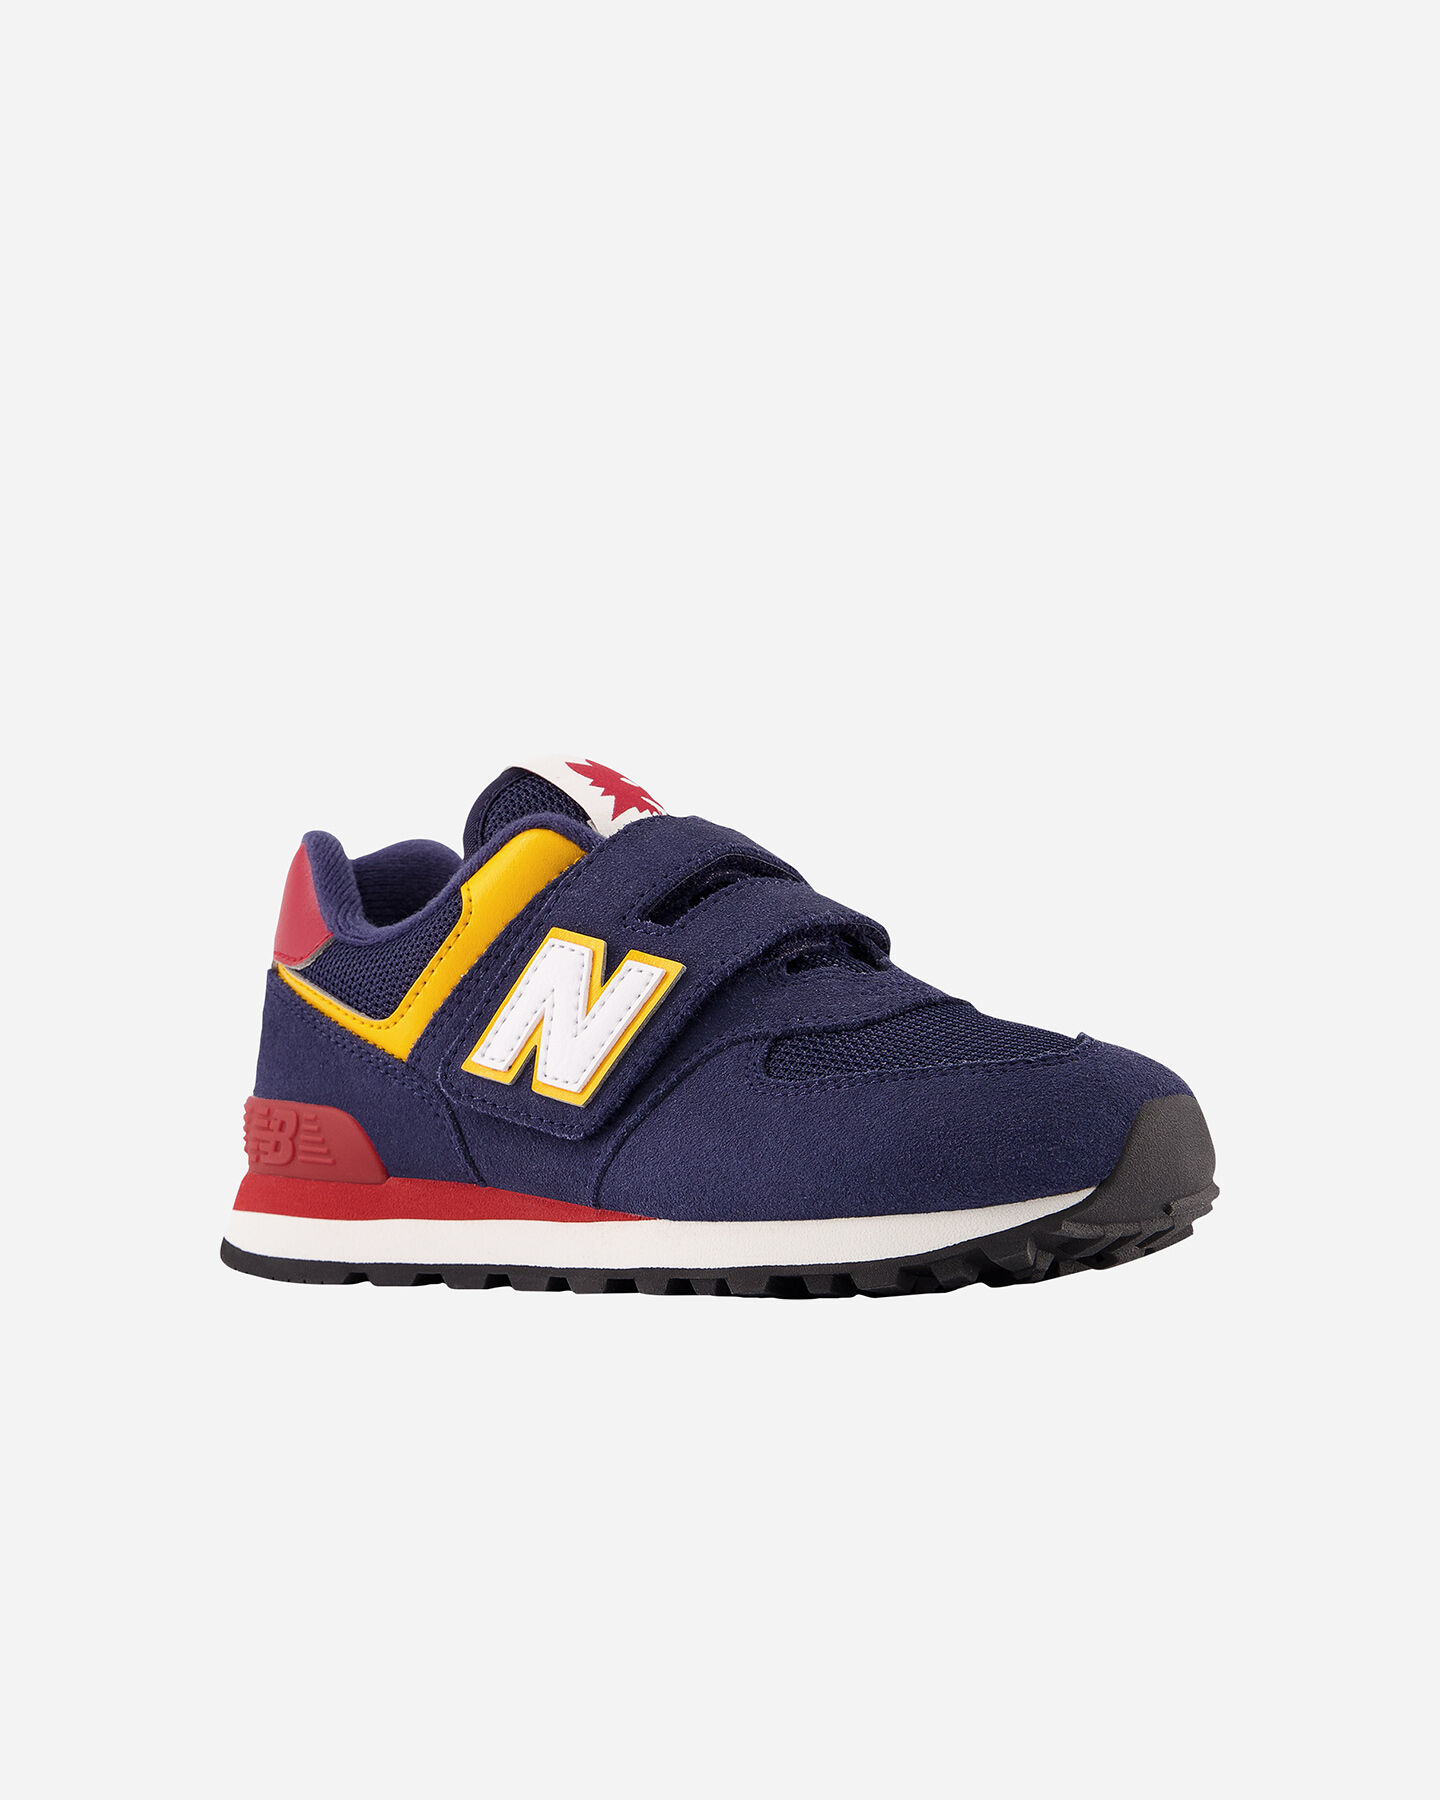  Scarpe sneakers NEW BALANCE 574 AS ROMA JR S5490863|-|M10- scatto 1